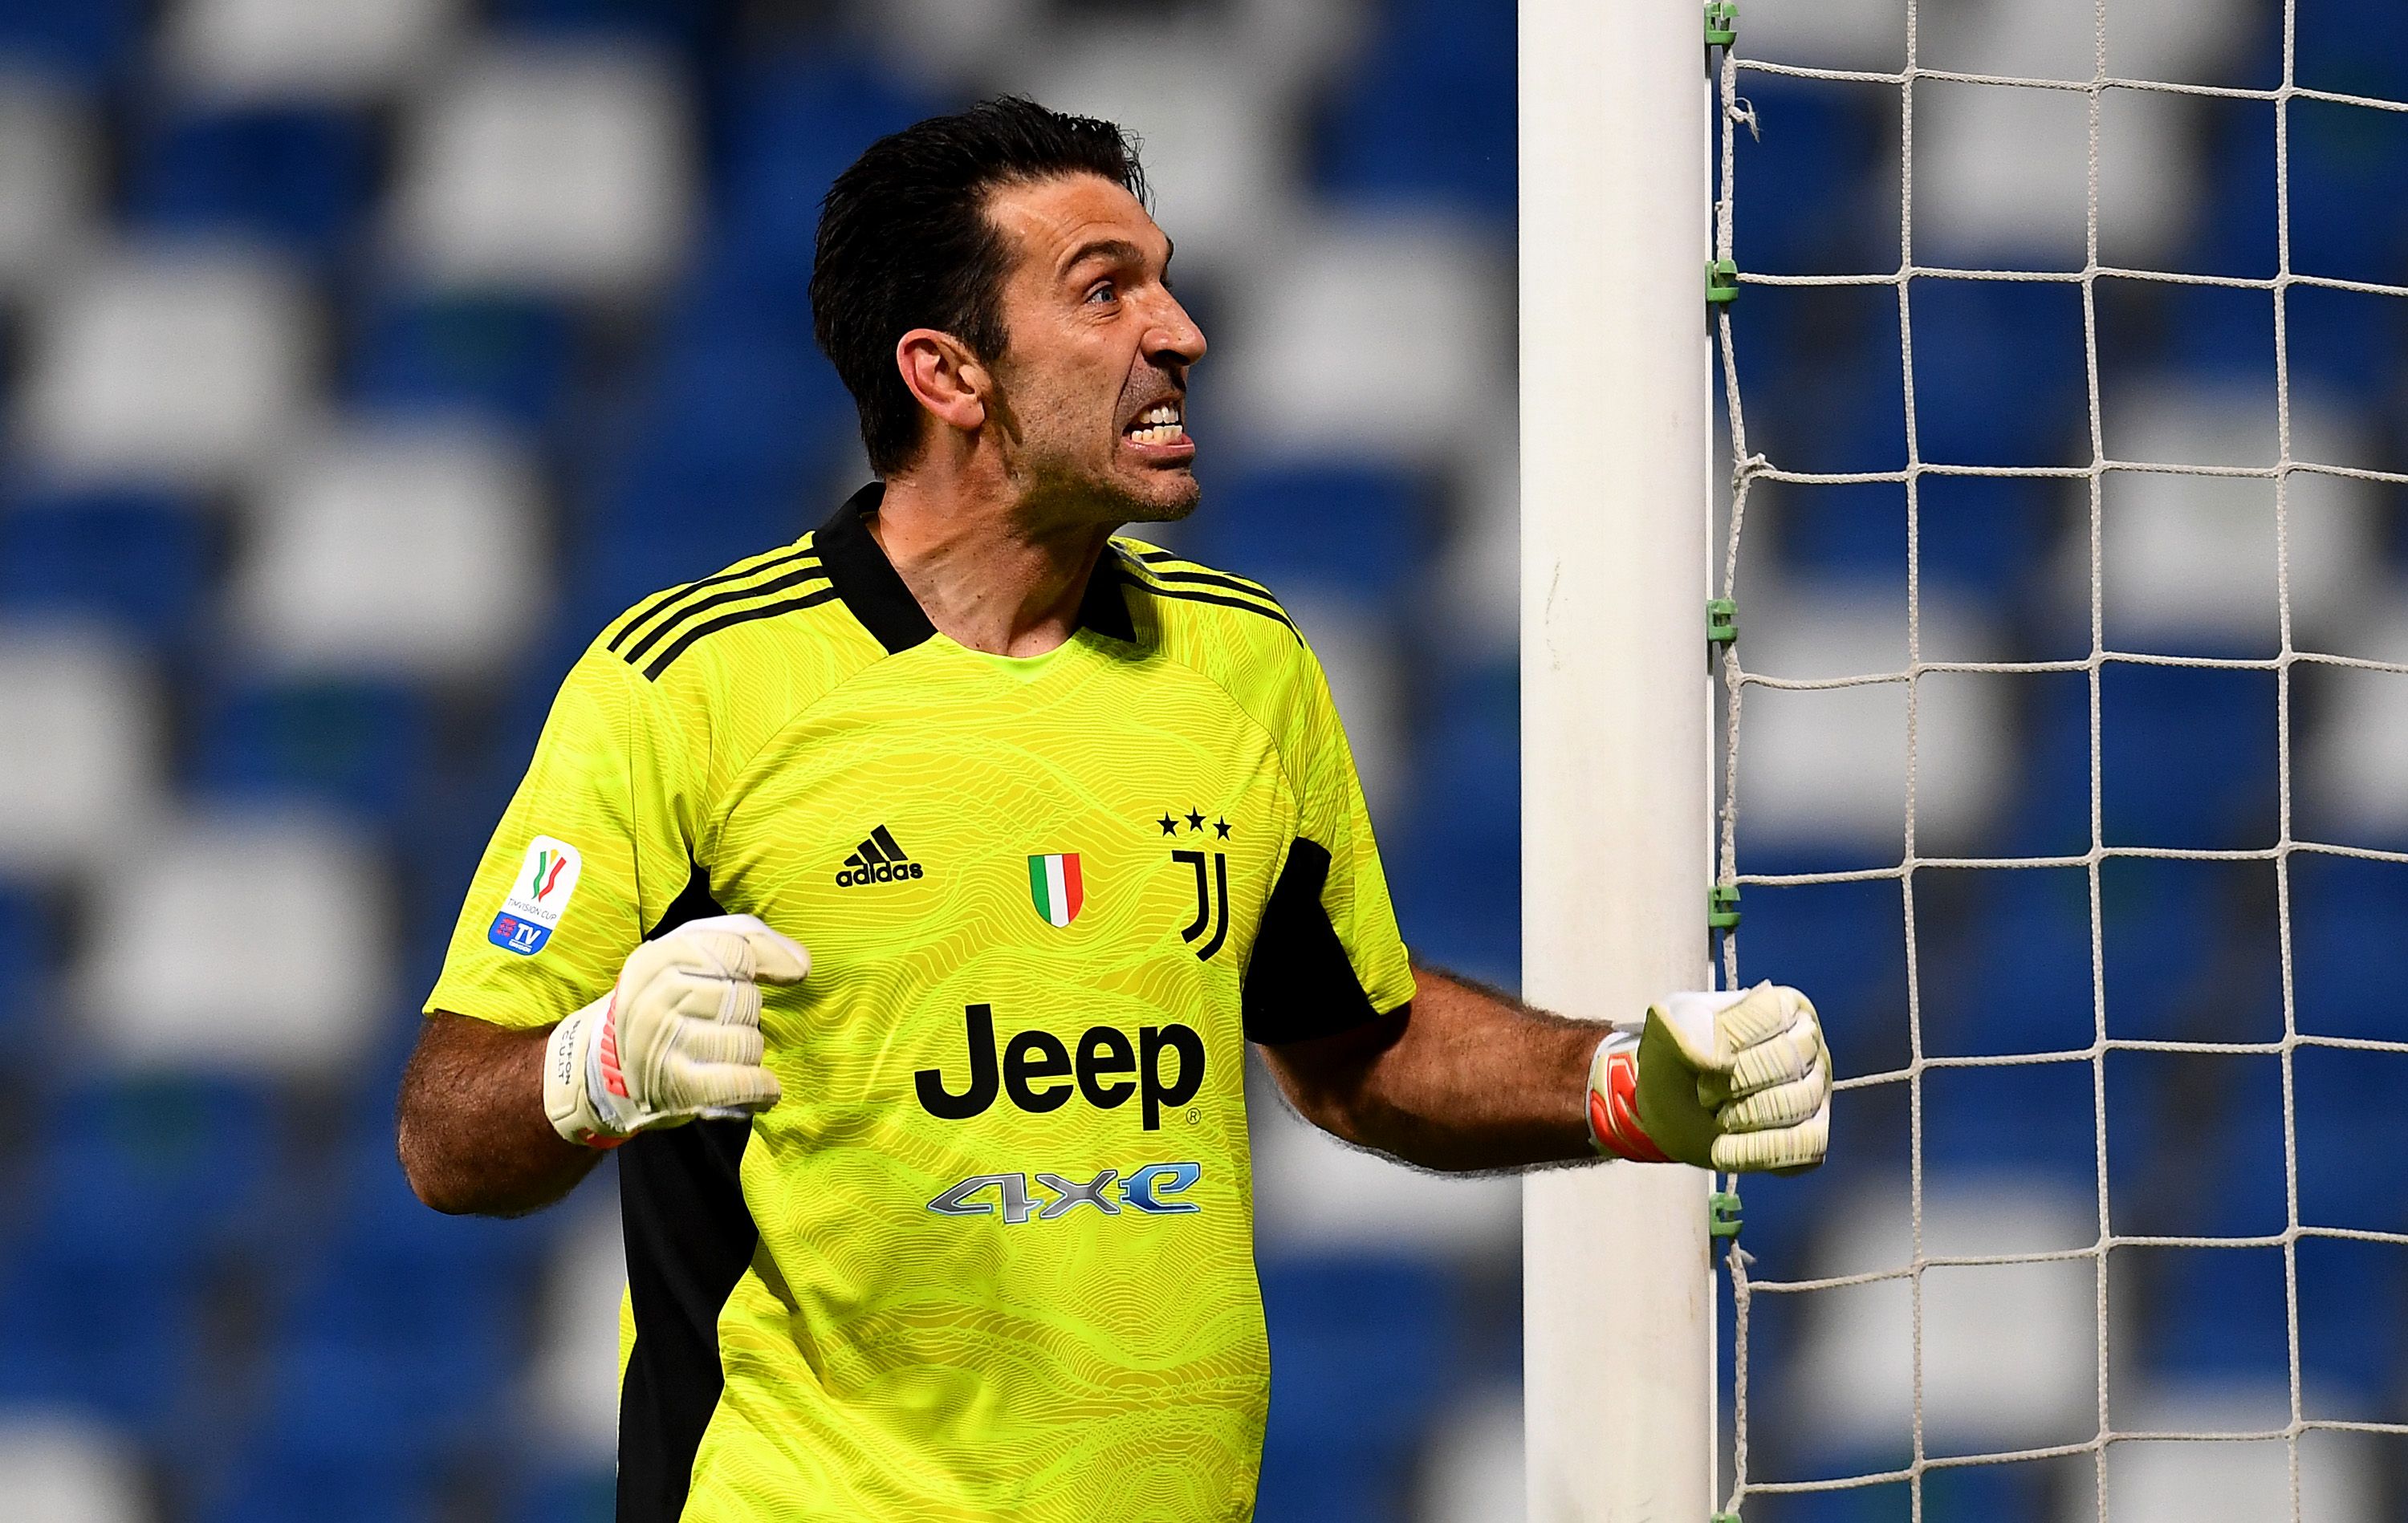 Gianluigi Buffon of Juventus reacts during the TIMVISION Cup Final between Atalanta BC and Juventus on May 19, 2021 in Reggio nell'Emilia, Italy. A limited number of fans will be allowed into the stadium as Coronavirus restrictions begin to ease in the UK.